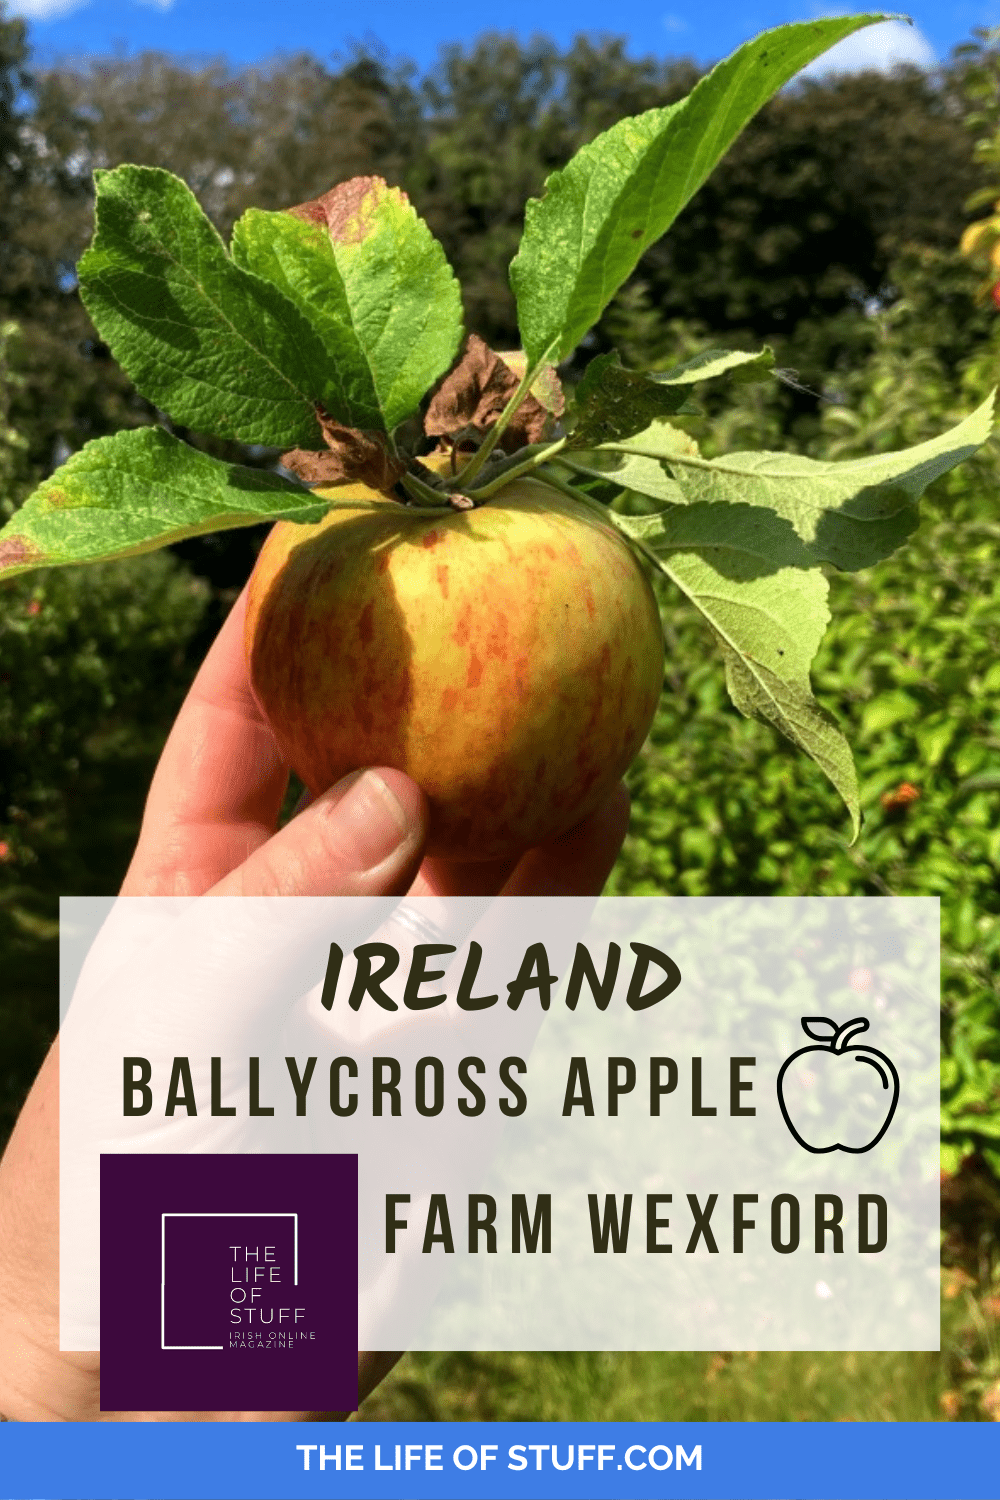 Ballycross Apple Farm Wexford - Picking Apples and Playtime - THE LIFE OF STUFF